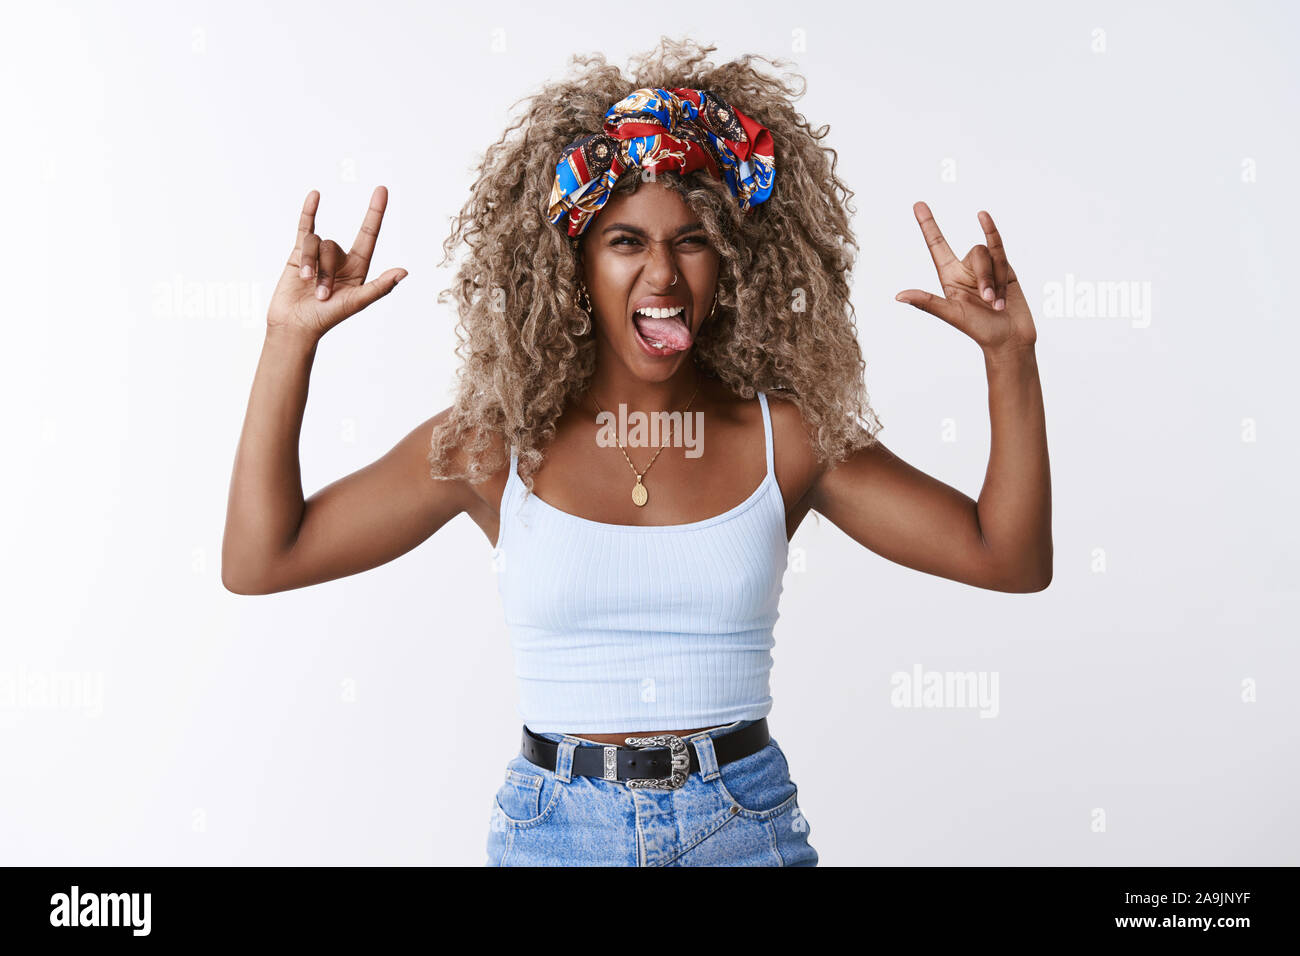 Daring and wild carefree good-looking blond african-american woman, afro  hairstyle, show tongue squinting joyful, make rock-n-roll or heavy metal  sign Stock Photo - Alamy